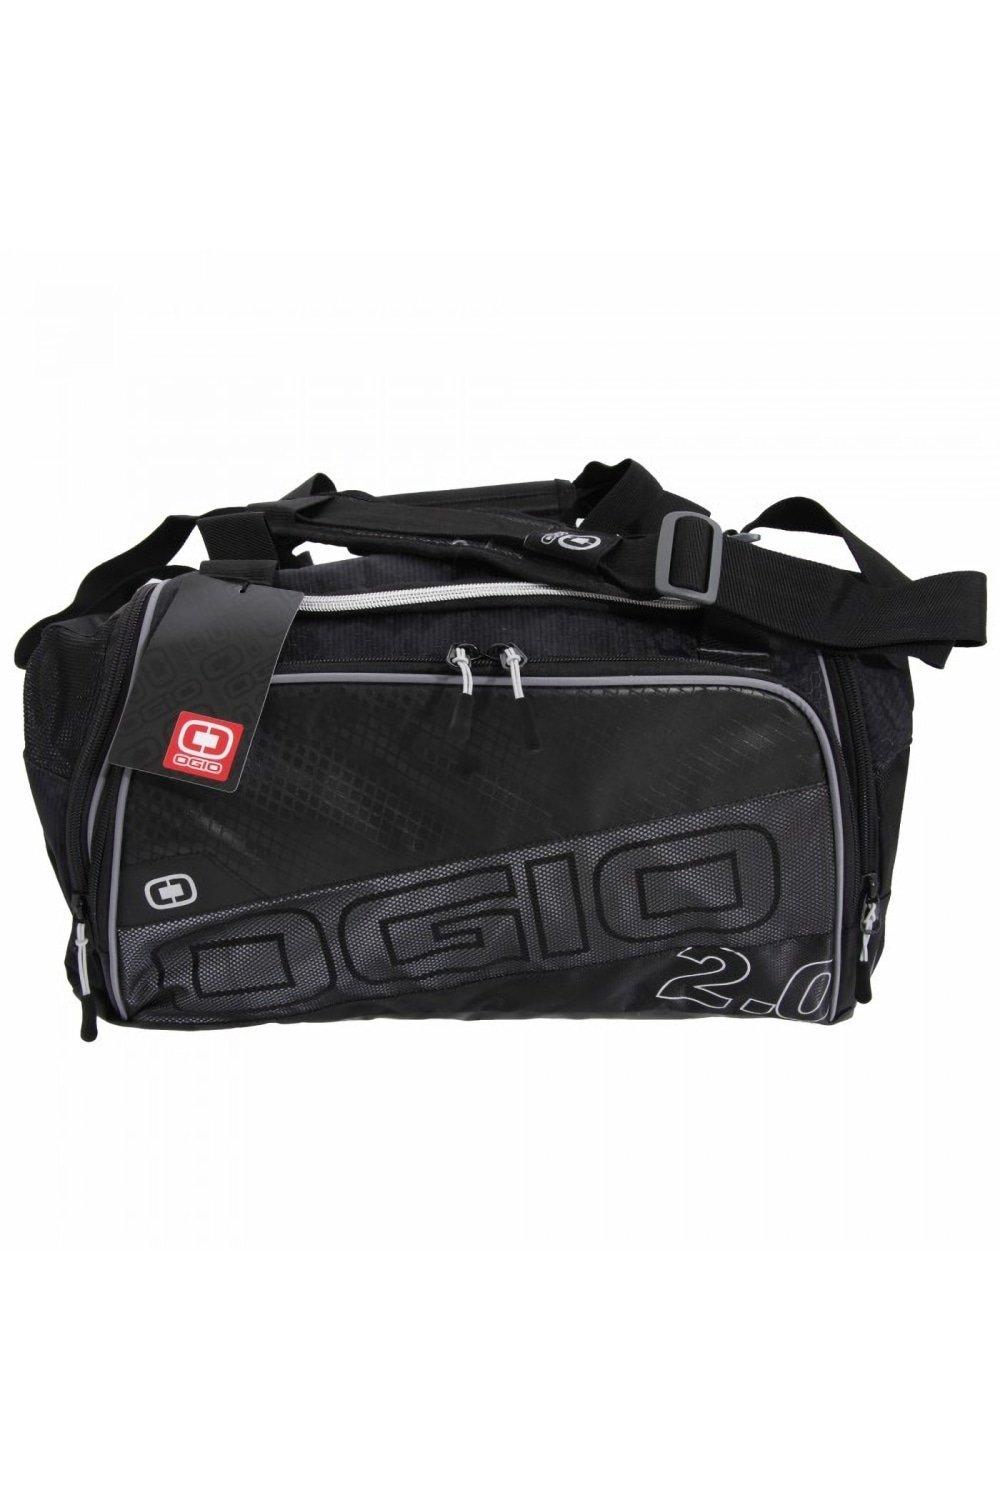 Endurance Sports 2.0 Duffle Bag (38 Litres) Pack of 2